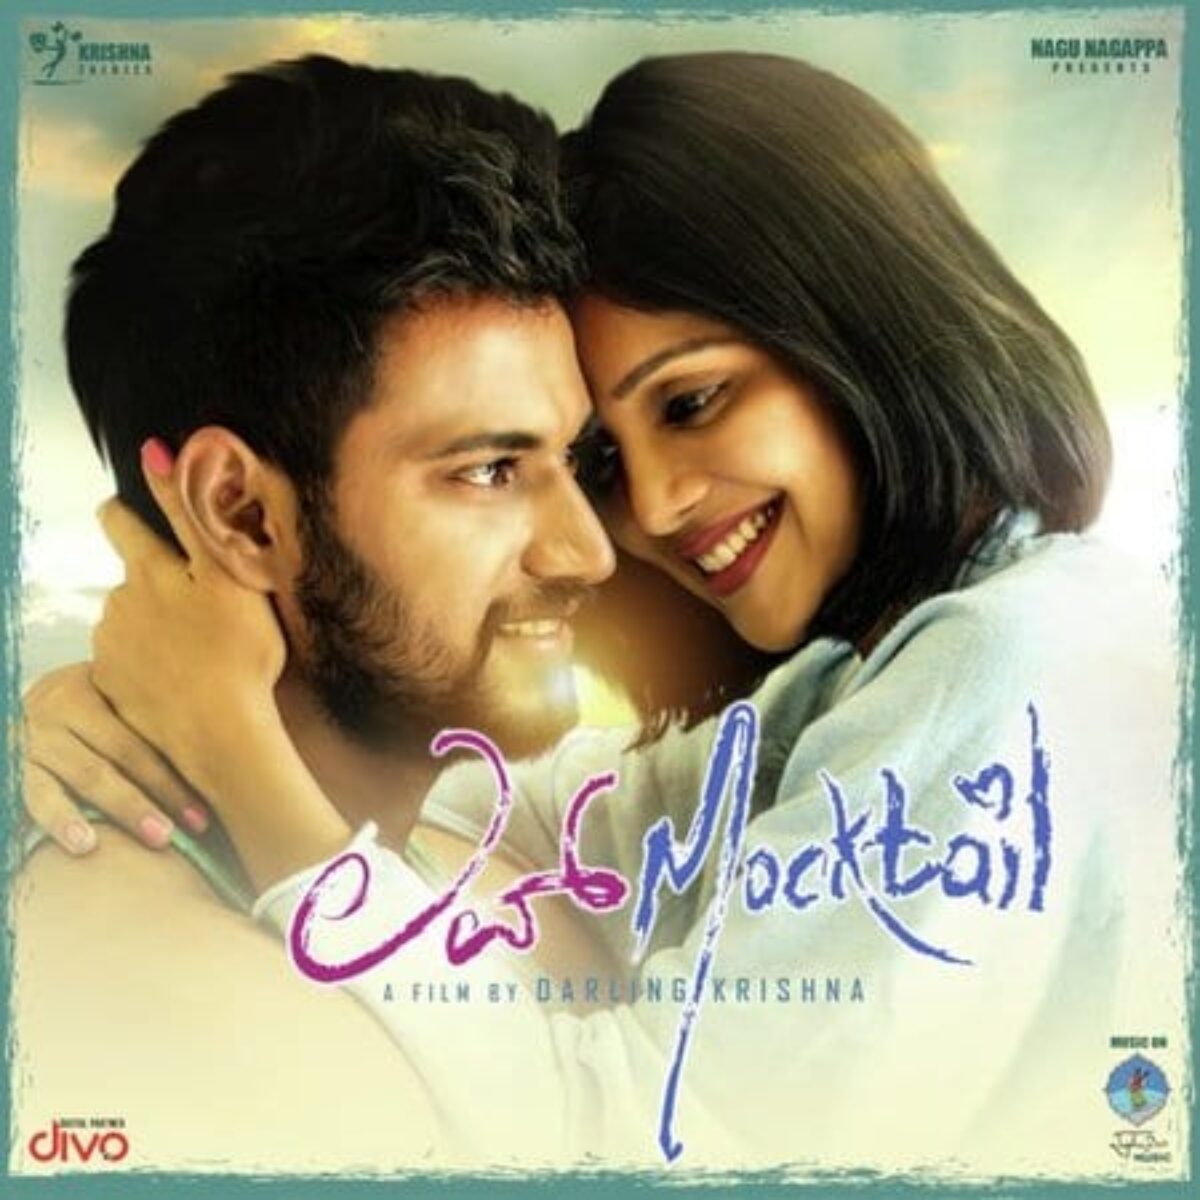 darling movie background music mp3 download